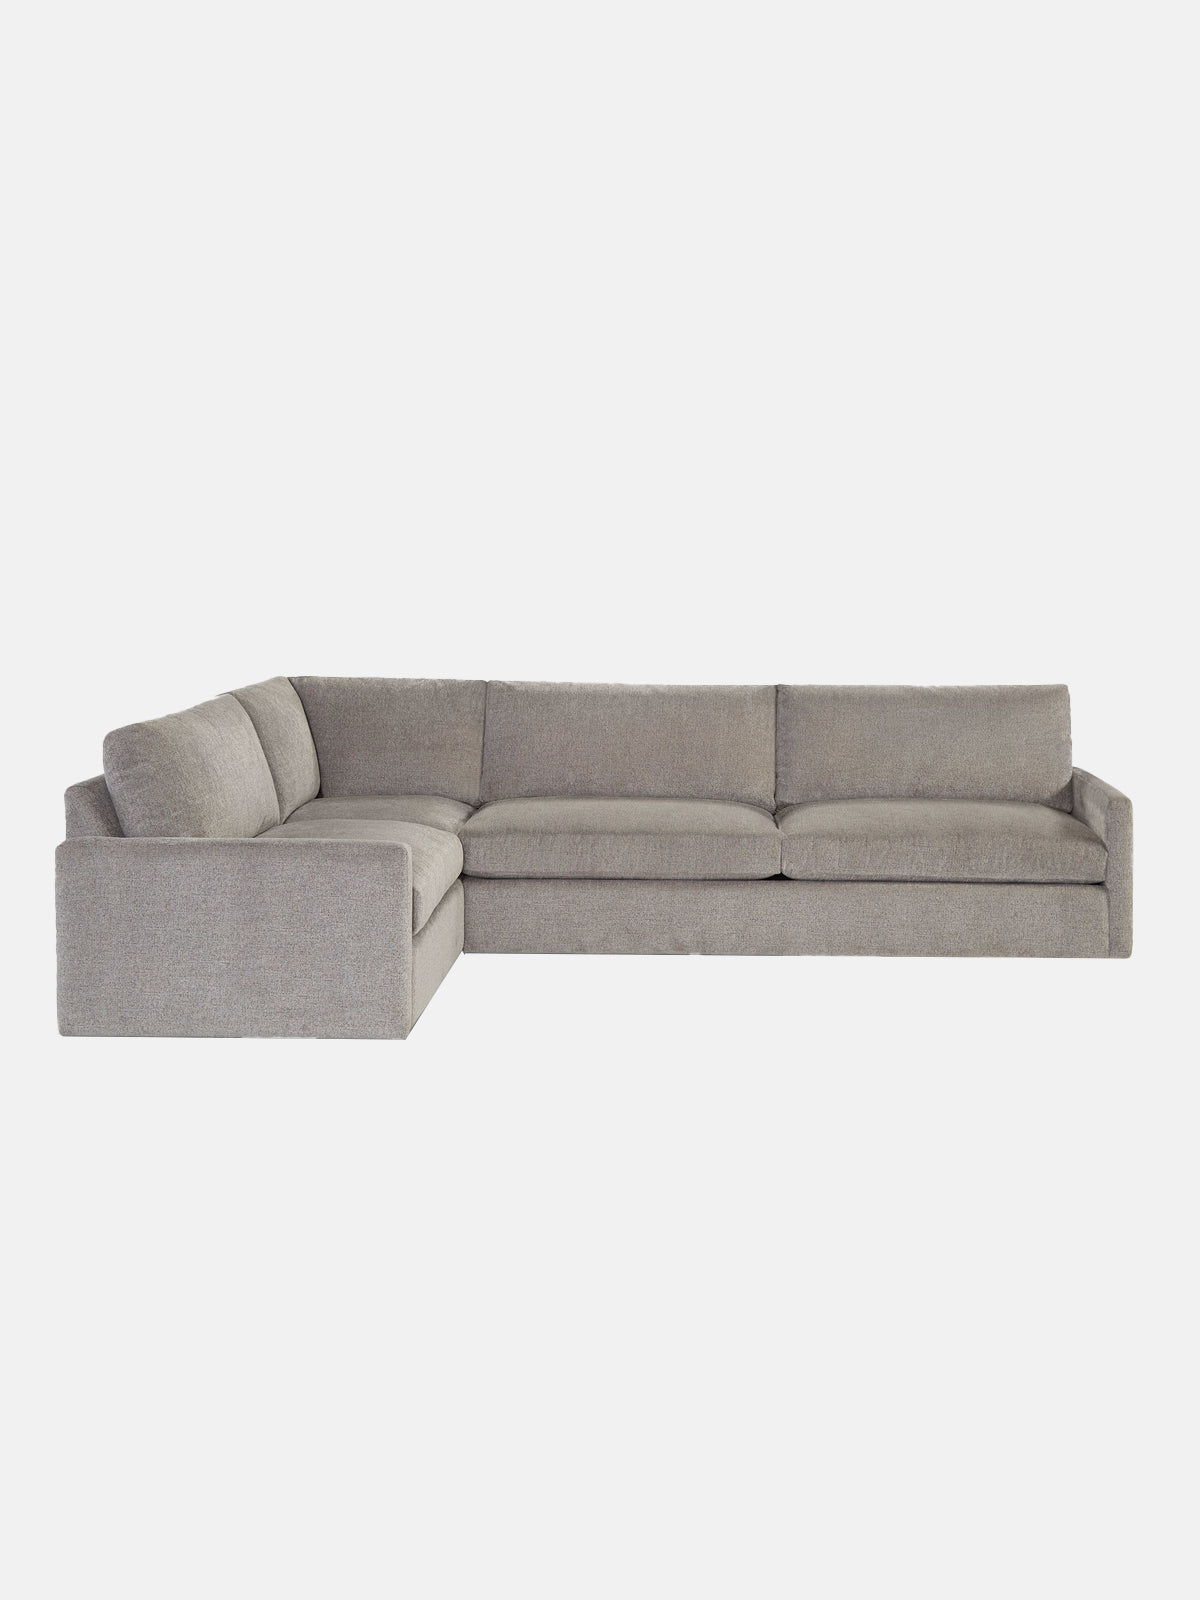 The Big Easy 2 Piece Sectional